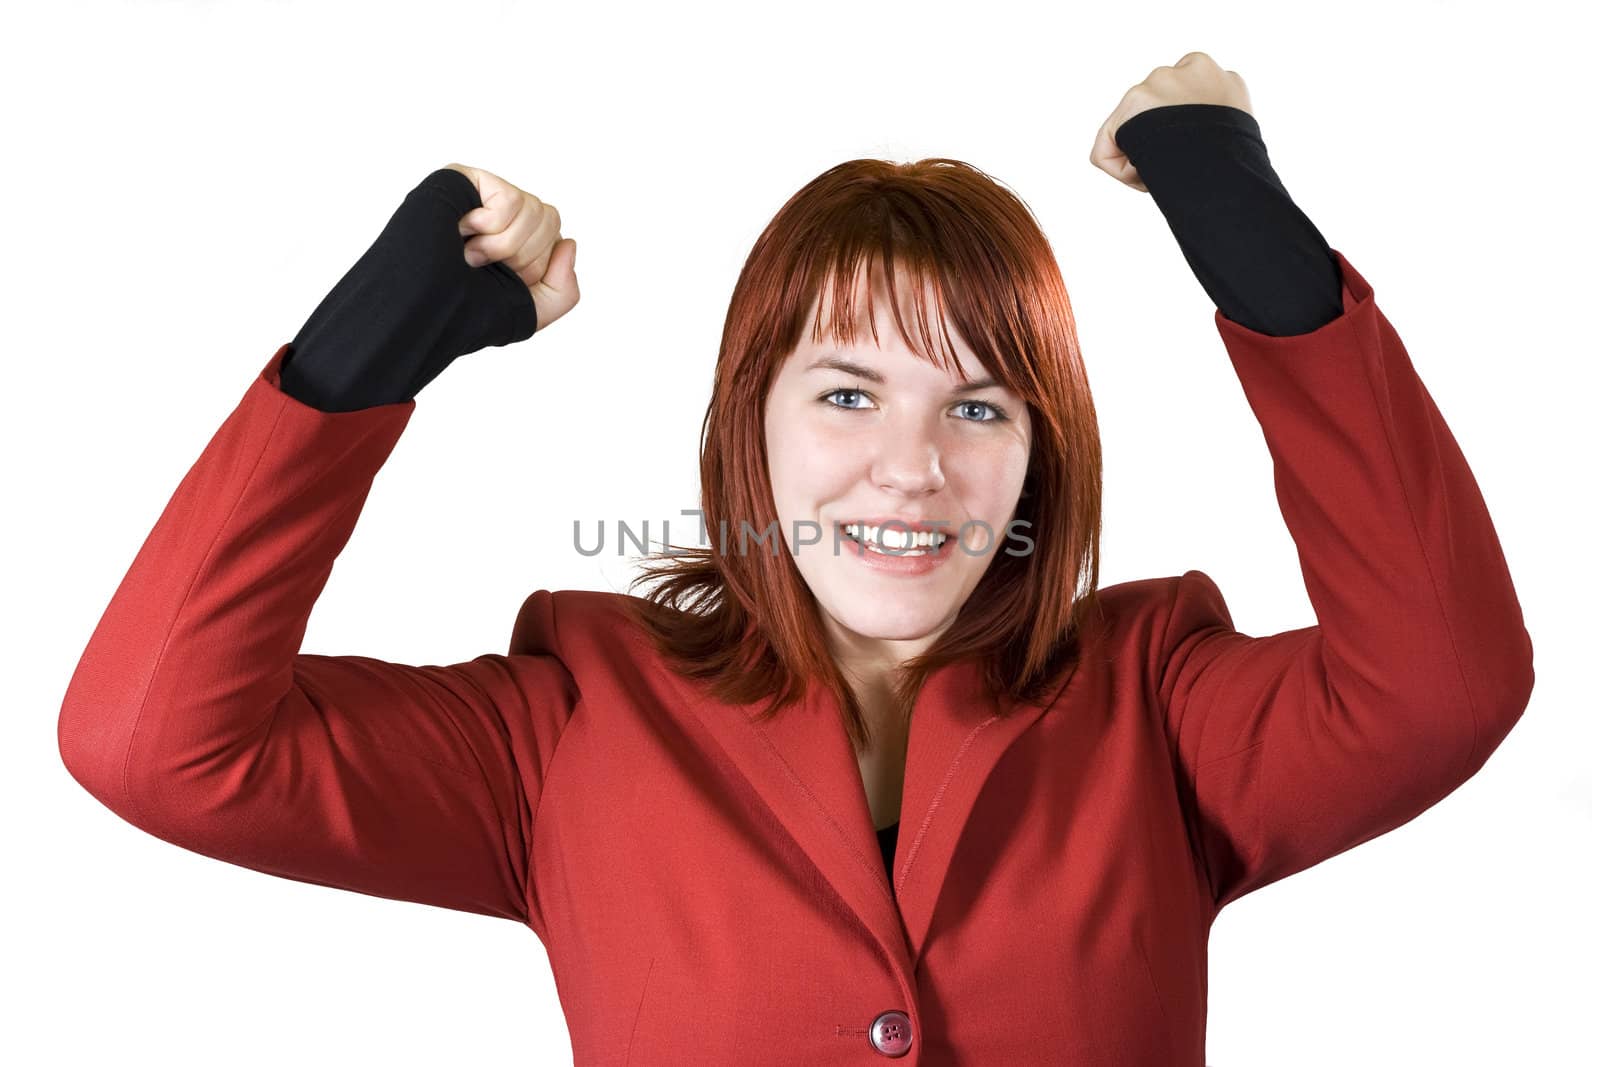 Cute girl with red hair dressed in a red business dress with her arms raised smiling and rejoicing for a win.

Studio shot.